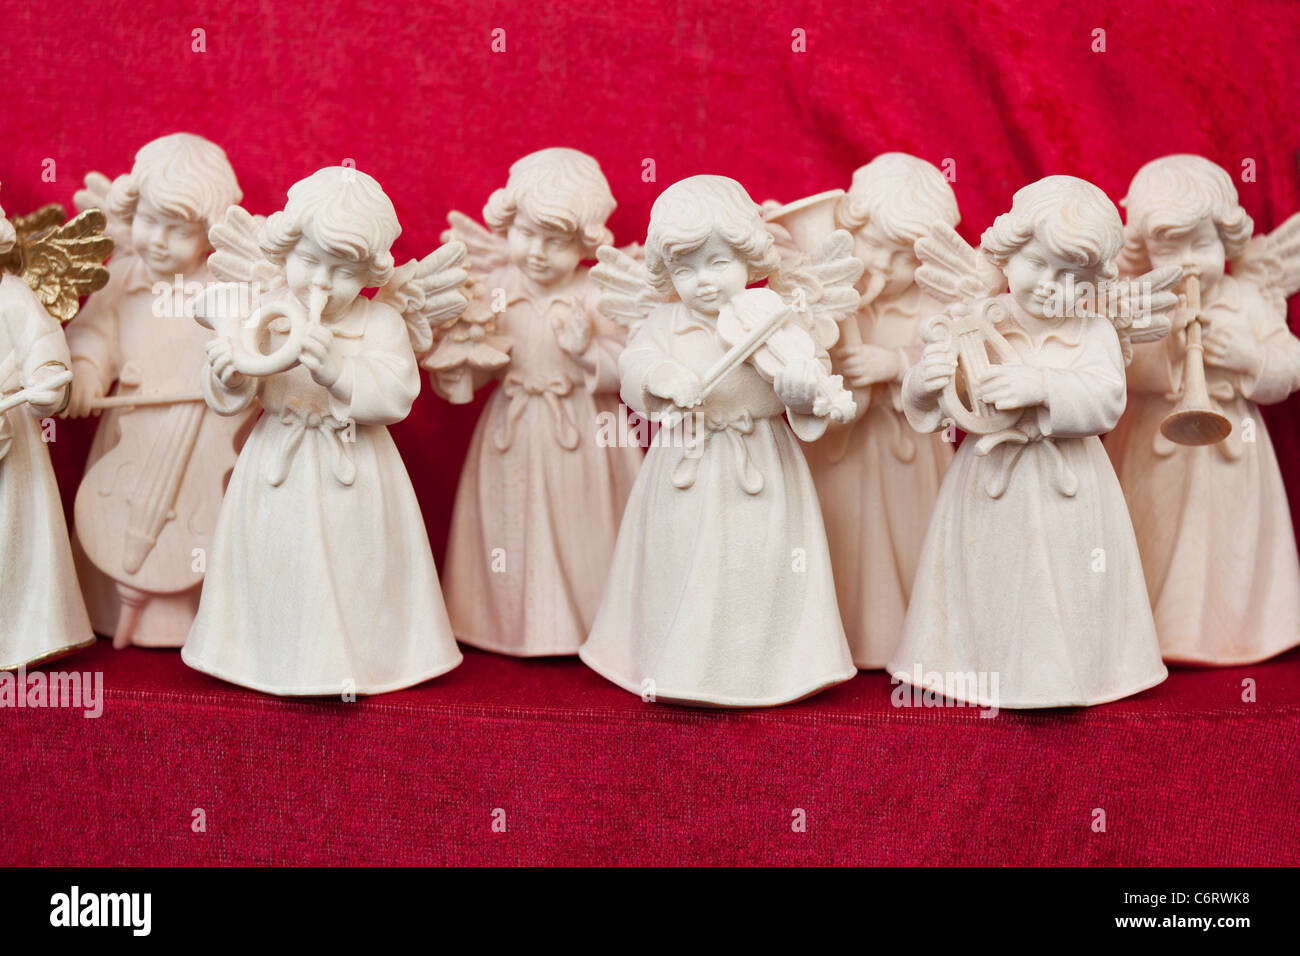 A set of angel statuettes playing various musical instrument. Focus on the central angel with a violin. Stock Photo